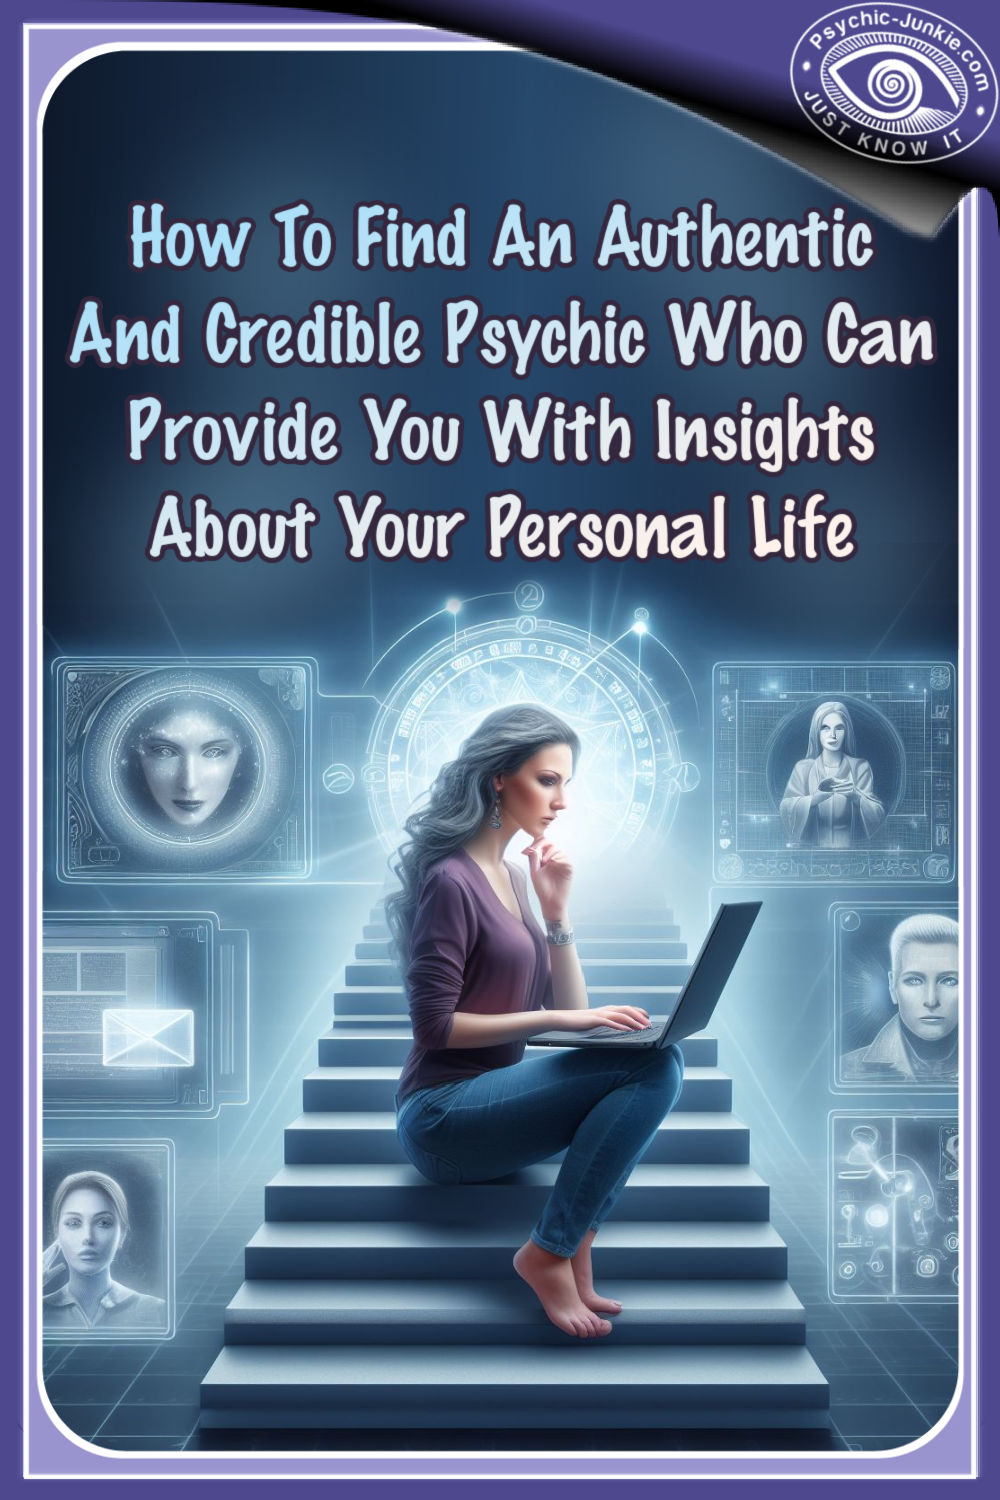 Finding An Authentic And Credible Psychic Who Can Provide You With Insights About Your Personal Life